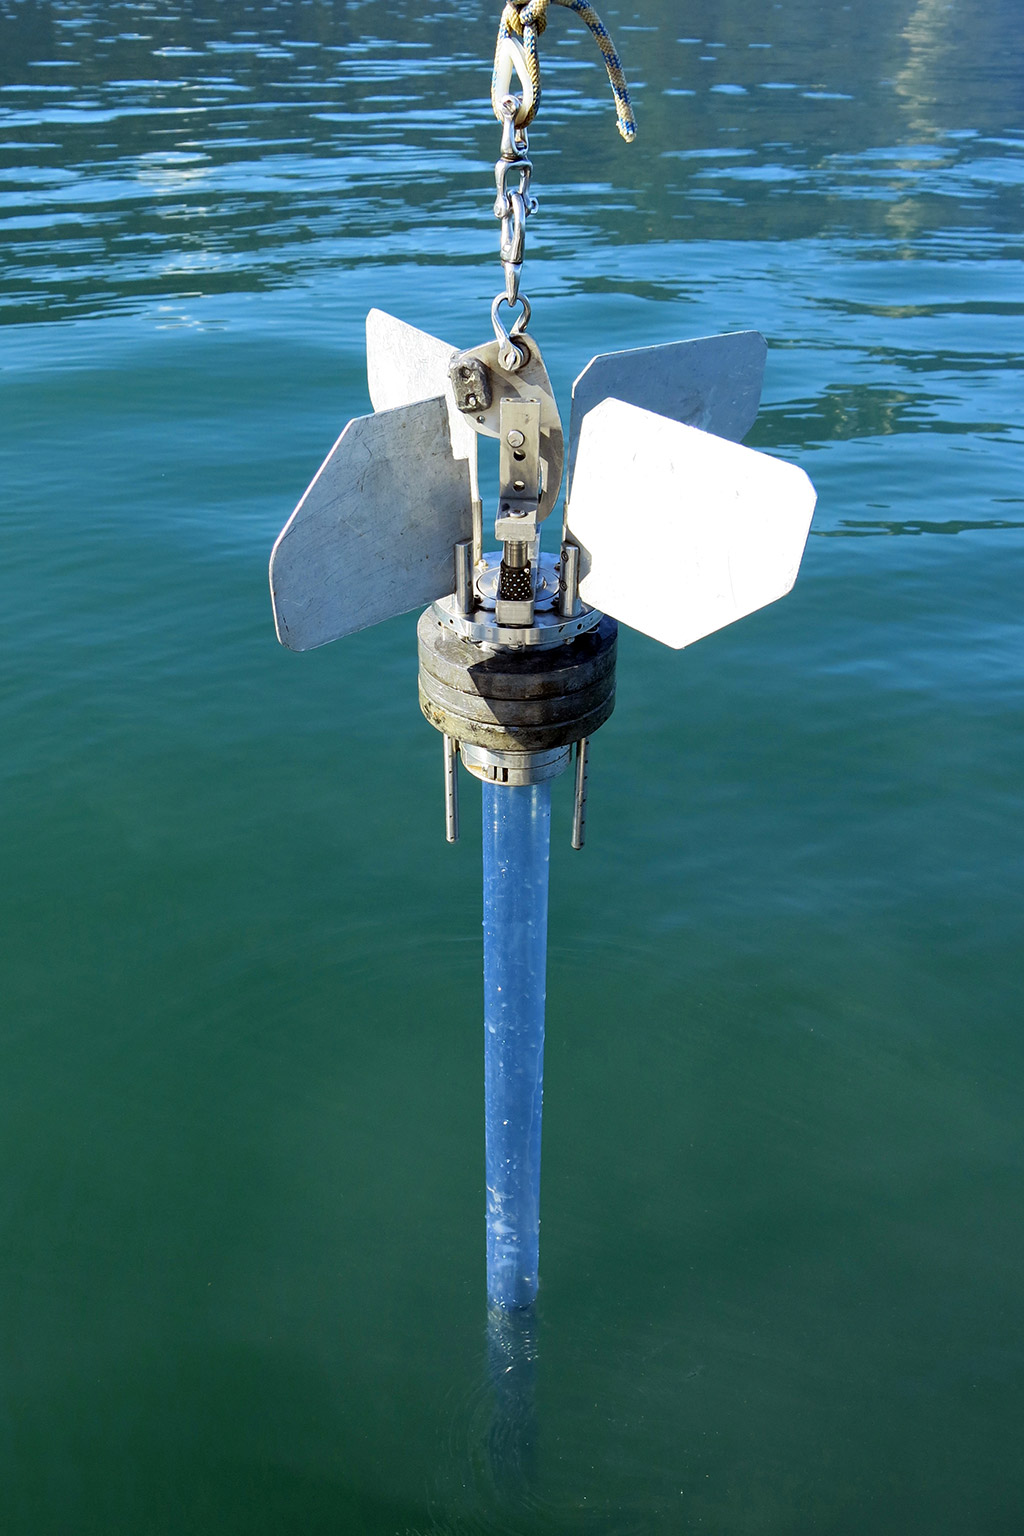 Enlarged view: Short coring device